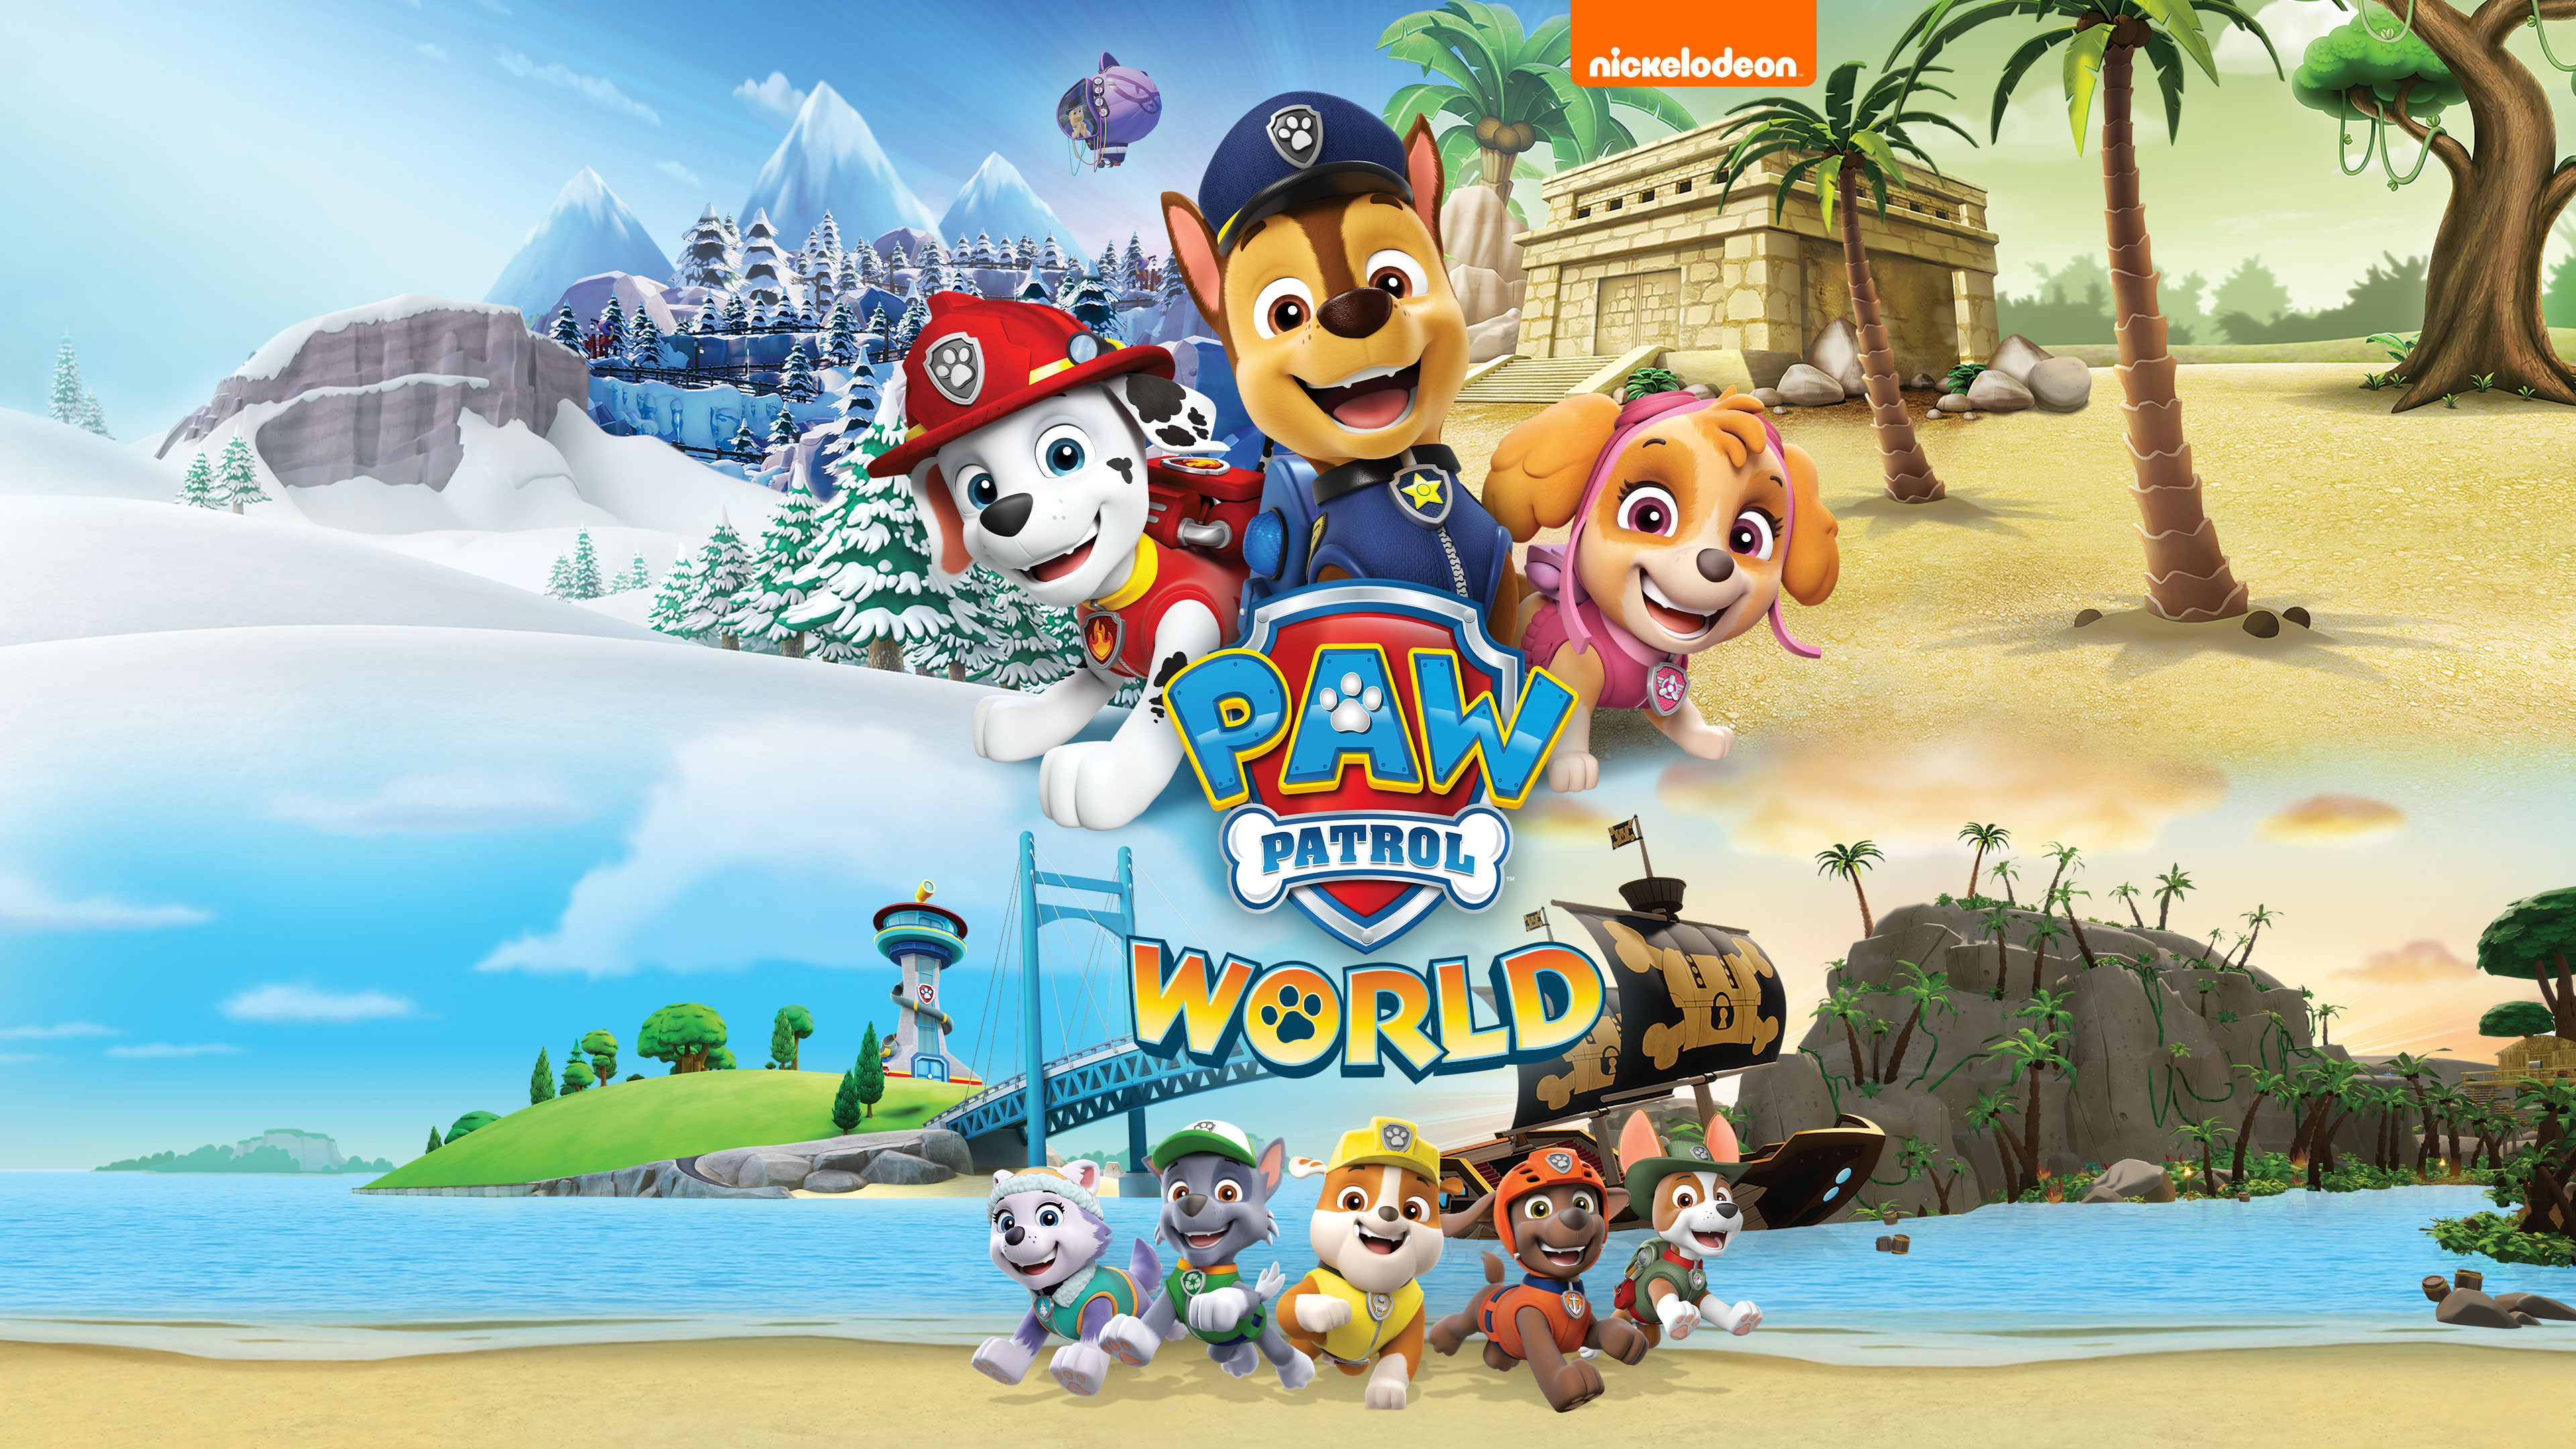 ©2023 Spin Master Ltd. PAW PATROL and all related titles, logos, characters; and SPIN MASTER logo are trademarks of Spin Master Ltd. Used under license. Nickelodeon and all related titles and logos are trademarks of Viacom International Inc. Published by Outright Games Limited. Software © 2023 Outright Games Limited. Developed by © 2023 3DClouds.it